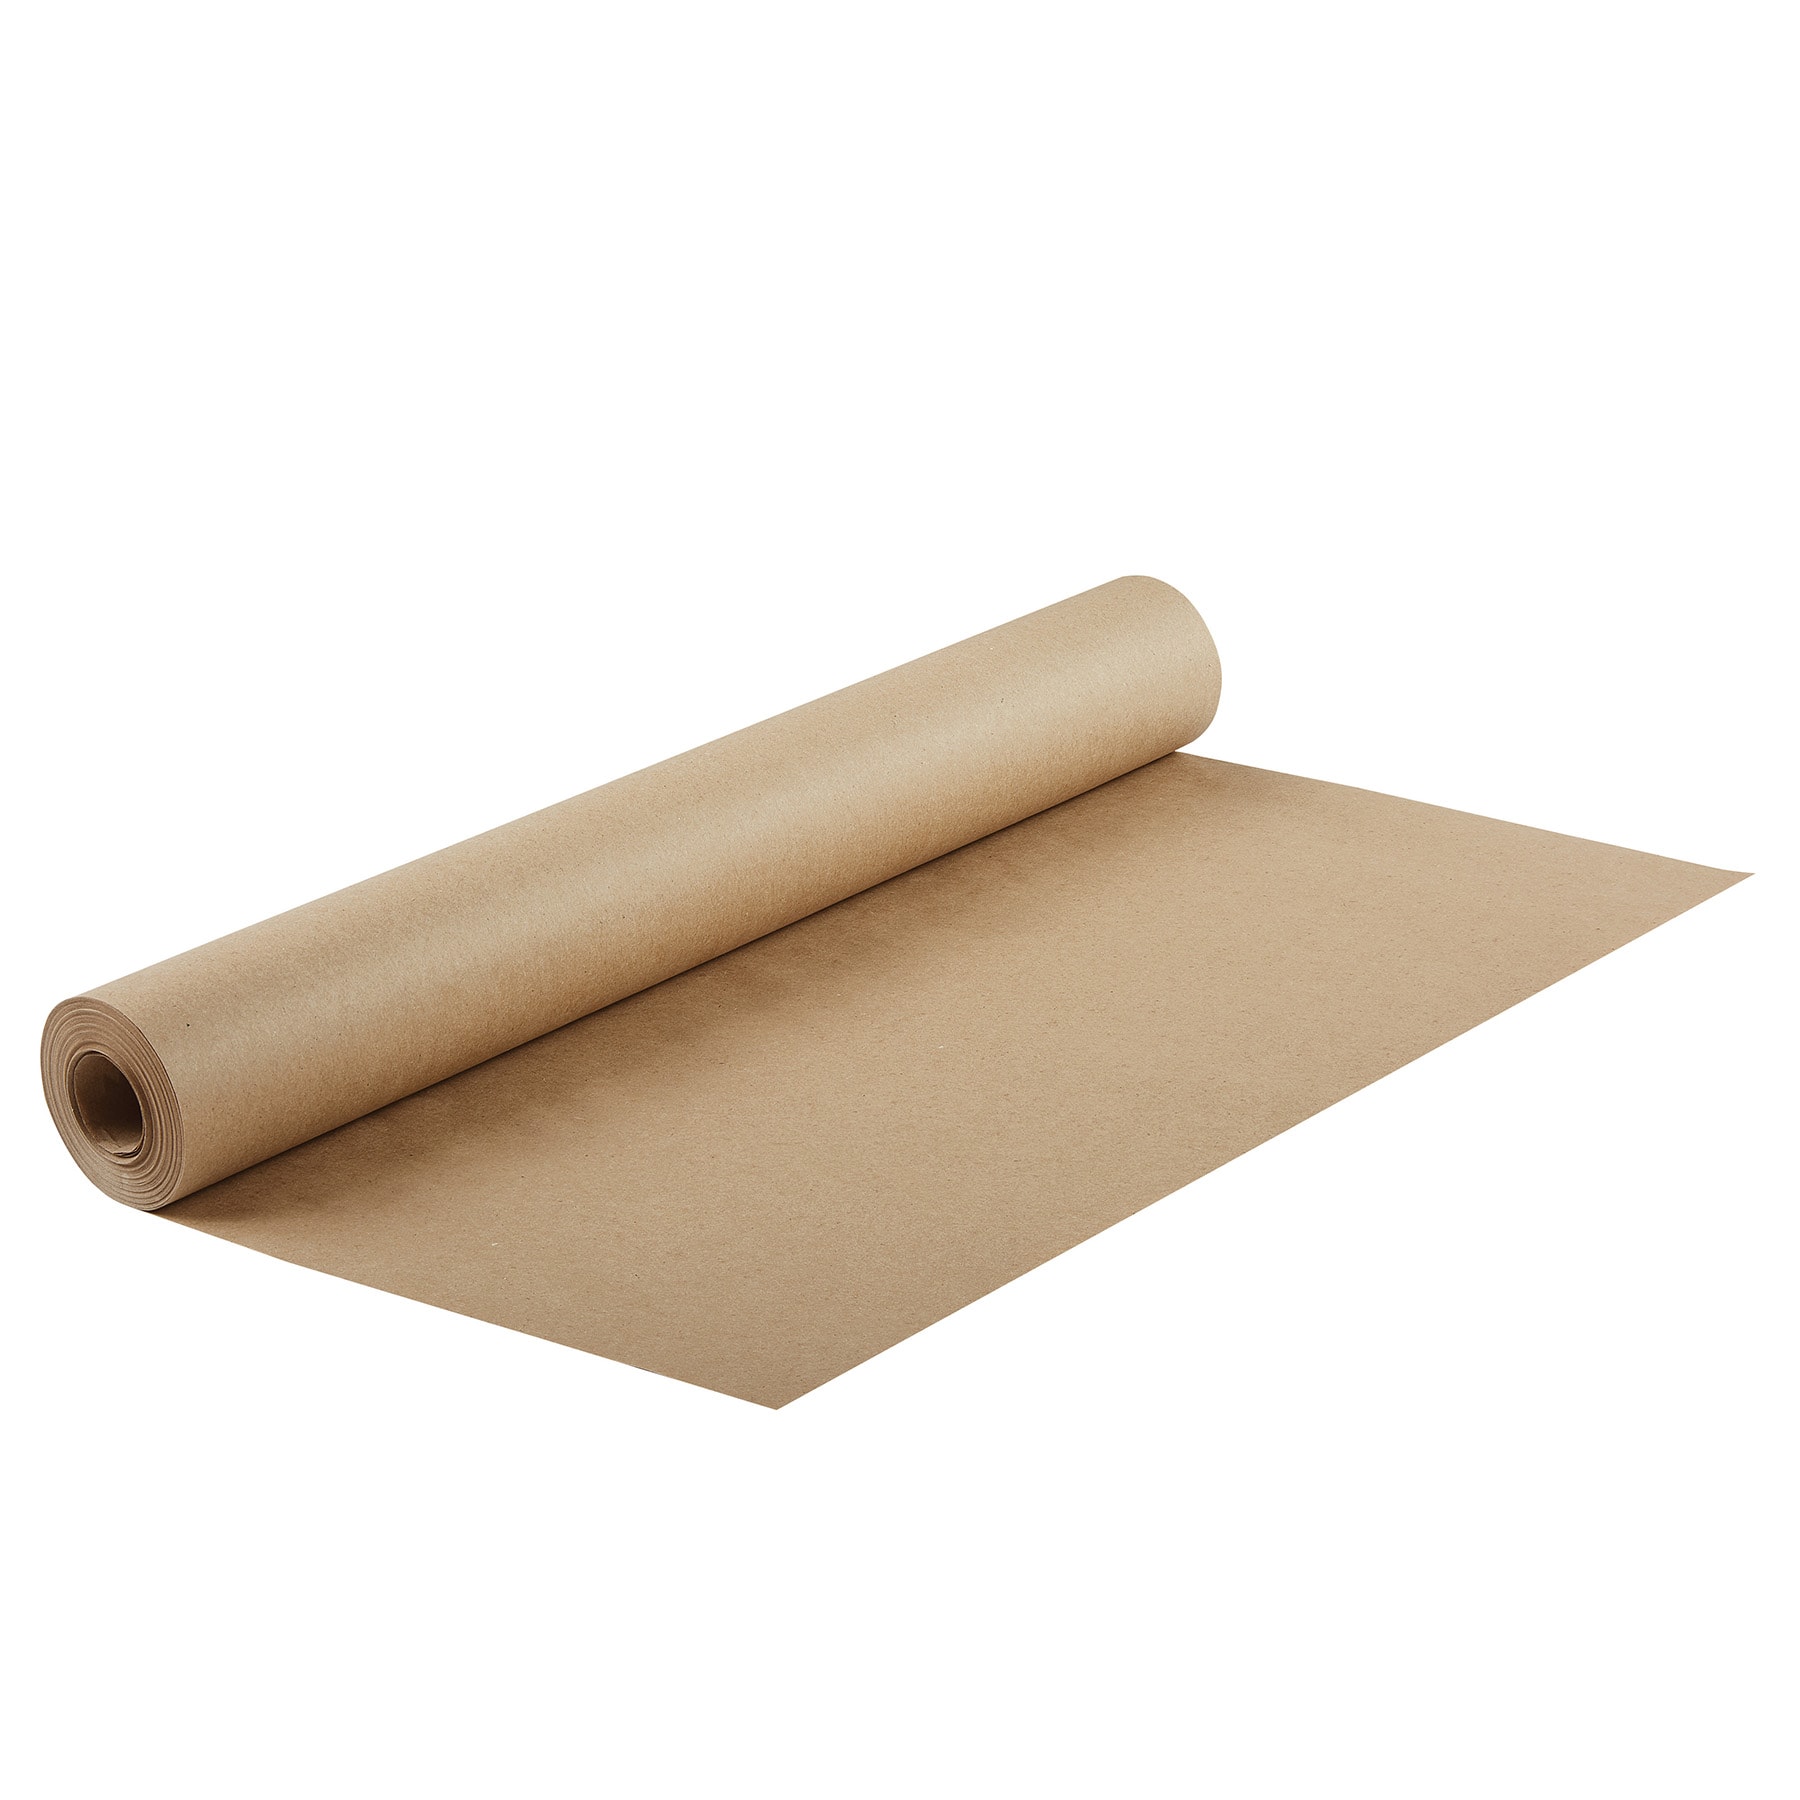 1 LARGE ROLL OF 88gsm PURE KRAFT BROWN WRAPPING PARCEL PAPER 750mm x 100 Metre 